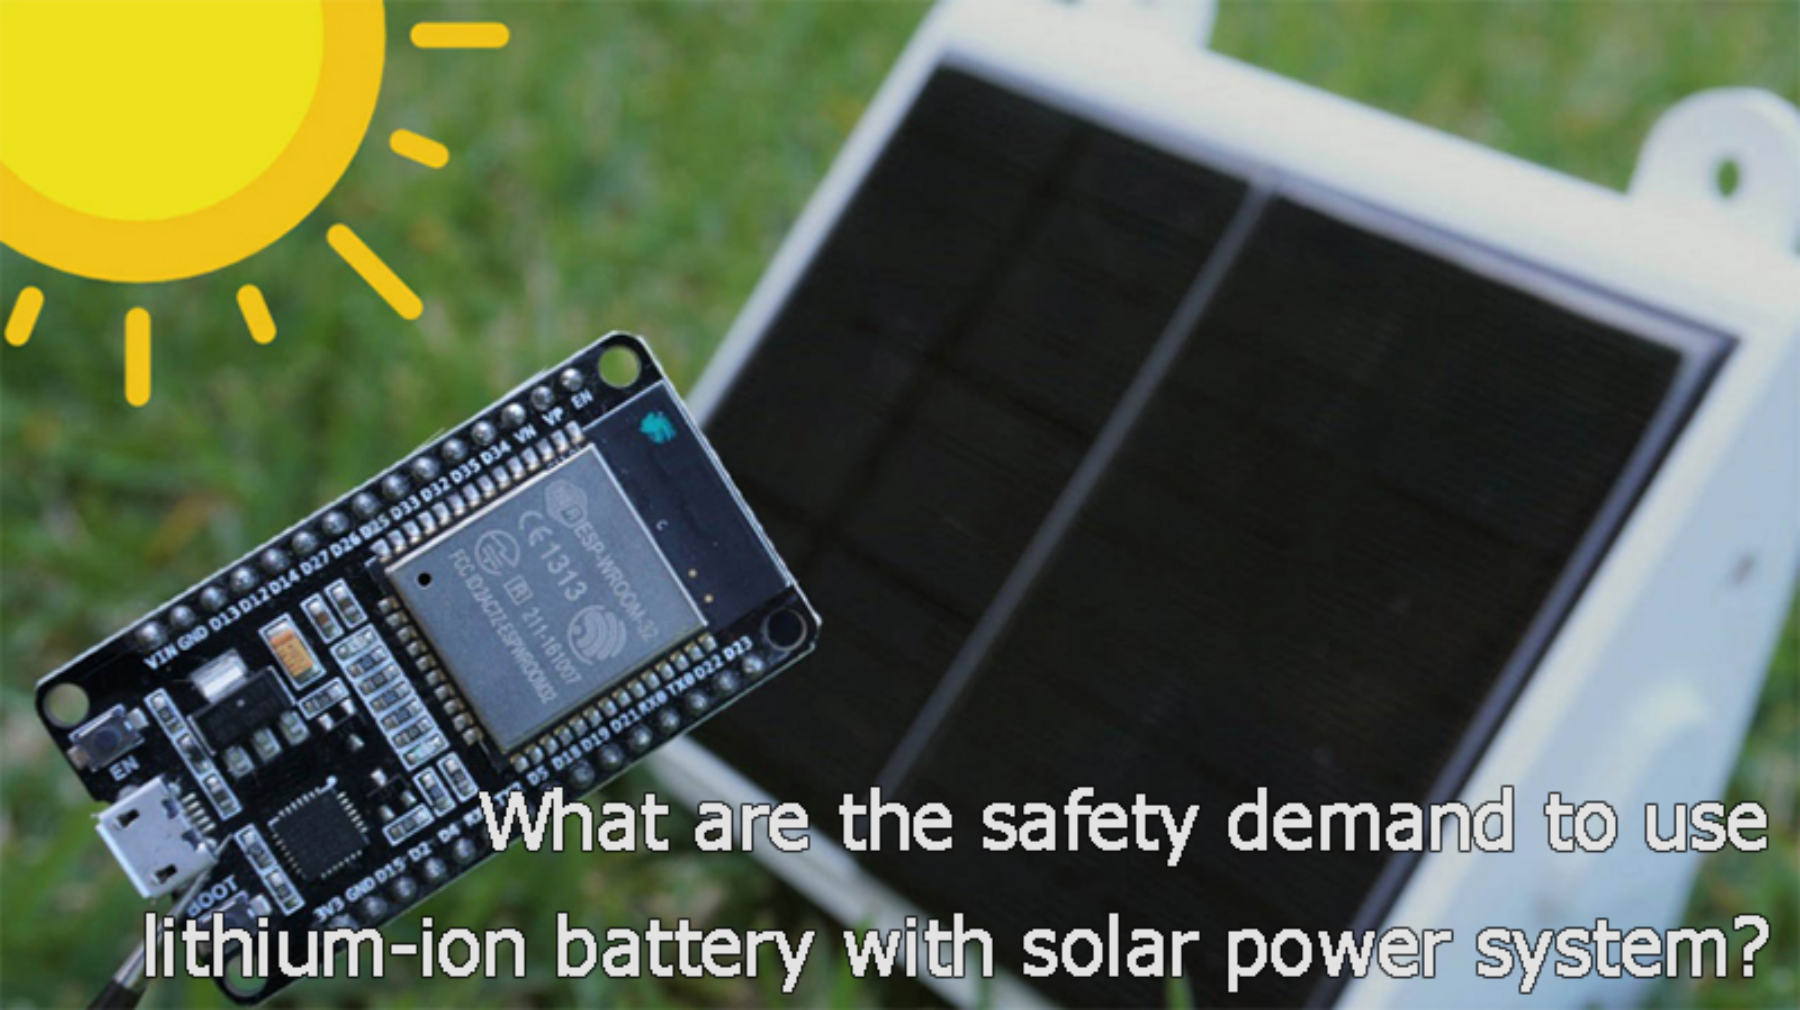 What are the safety demand to use lithium-ion battery with solar power system